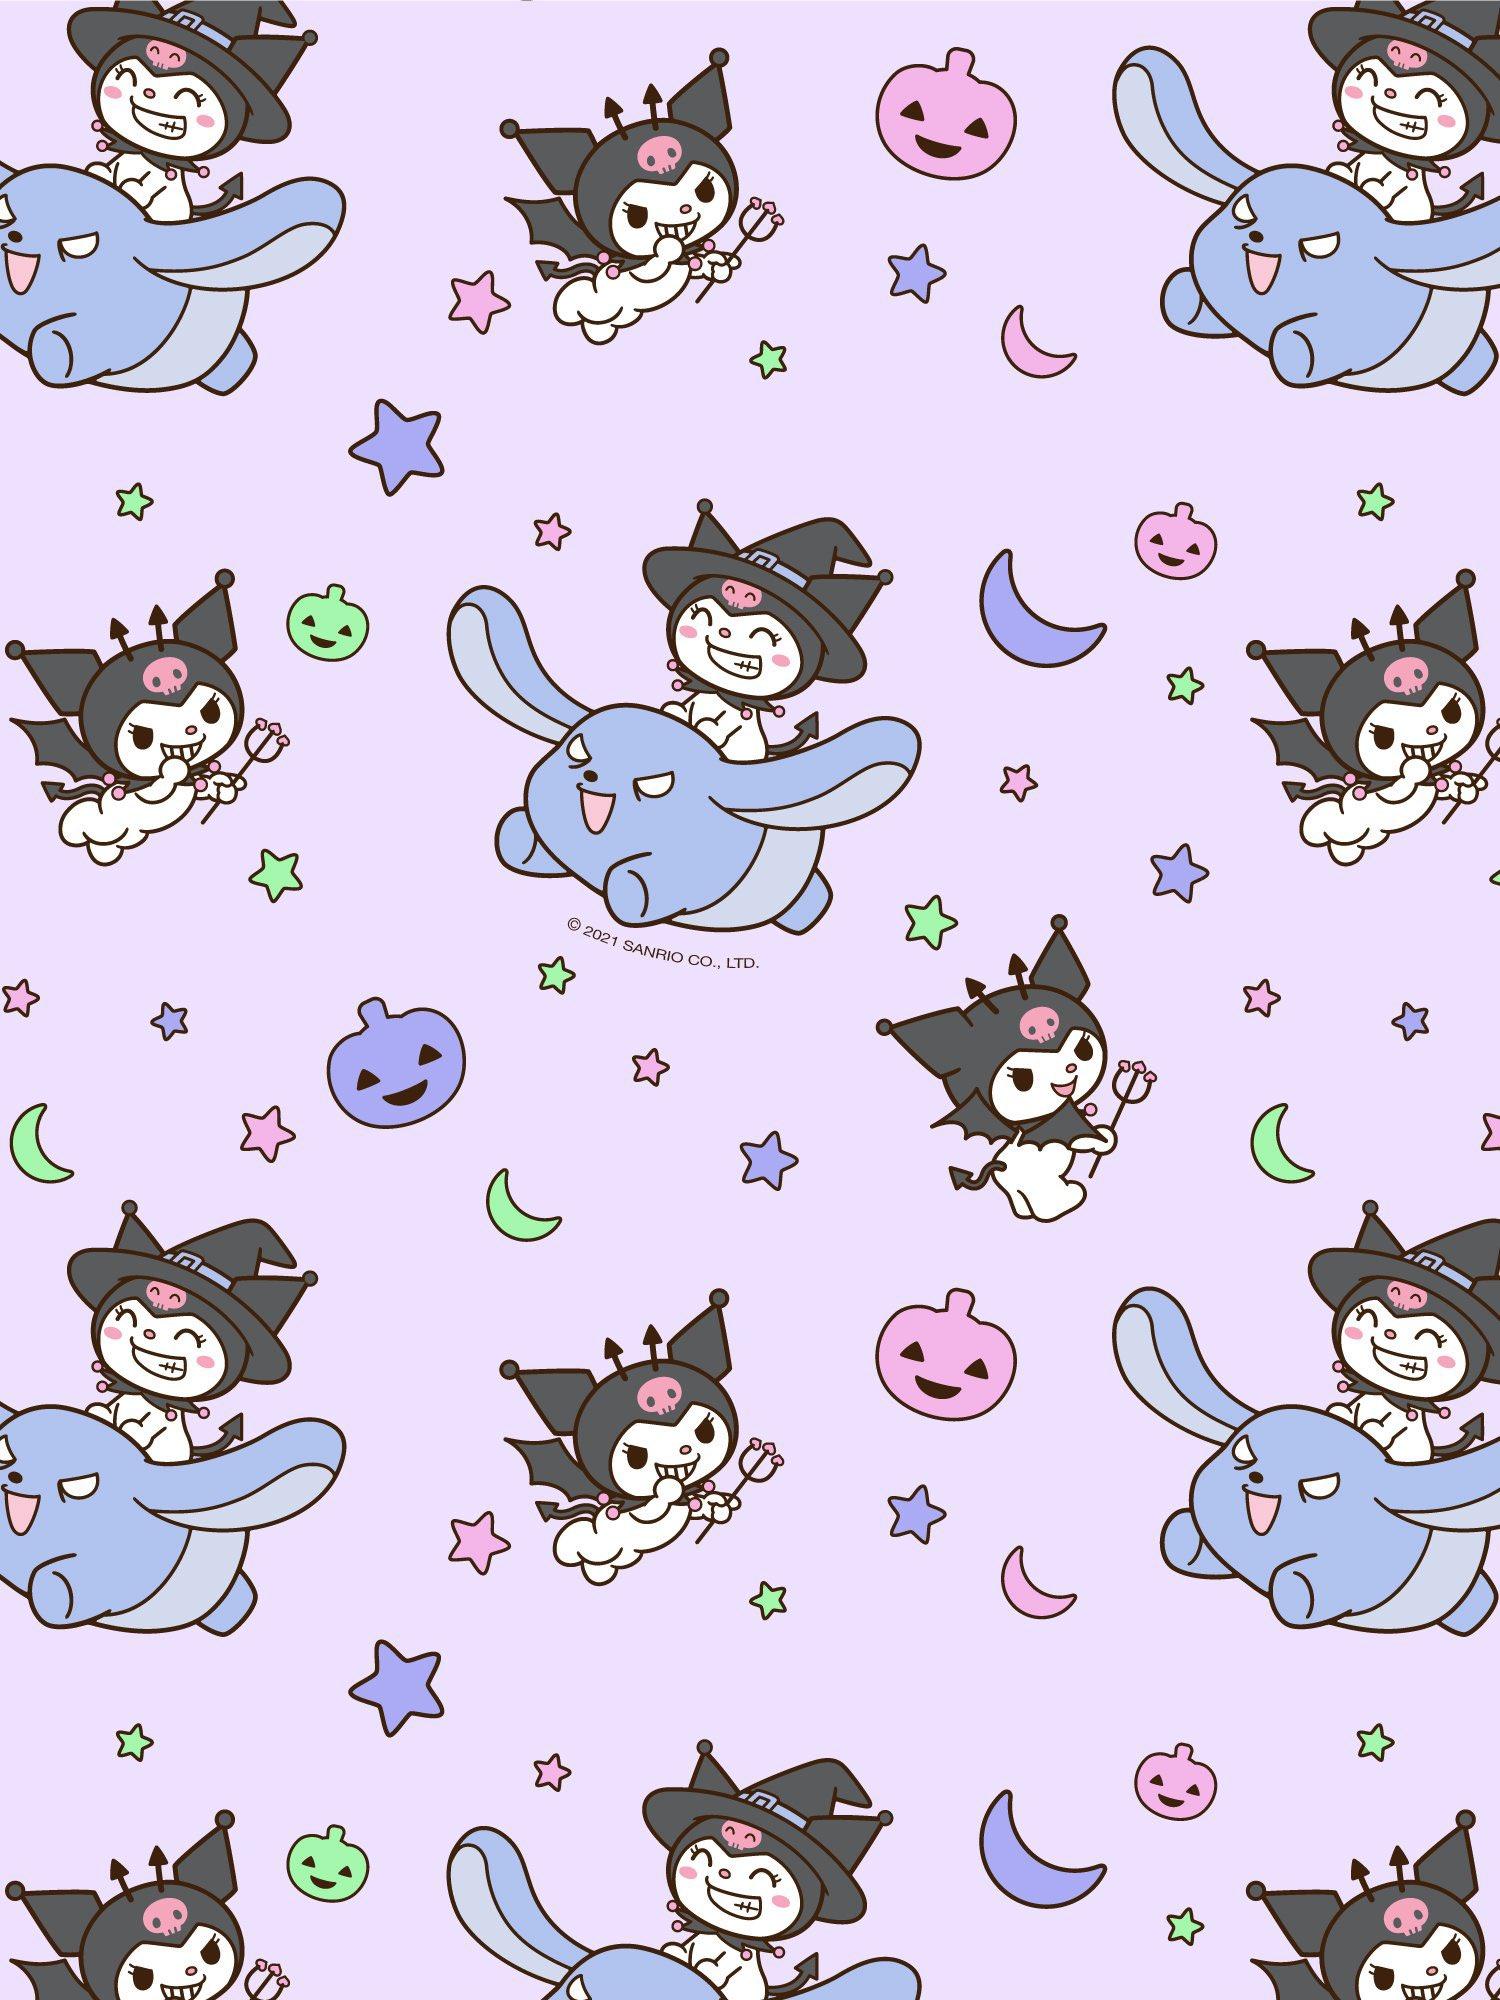 Candy Corpse on Sanrio really blessed us with the Kuromi